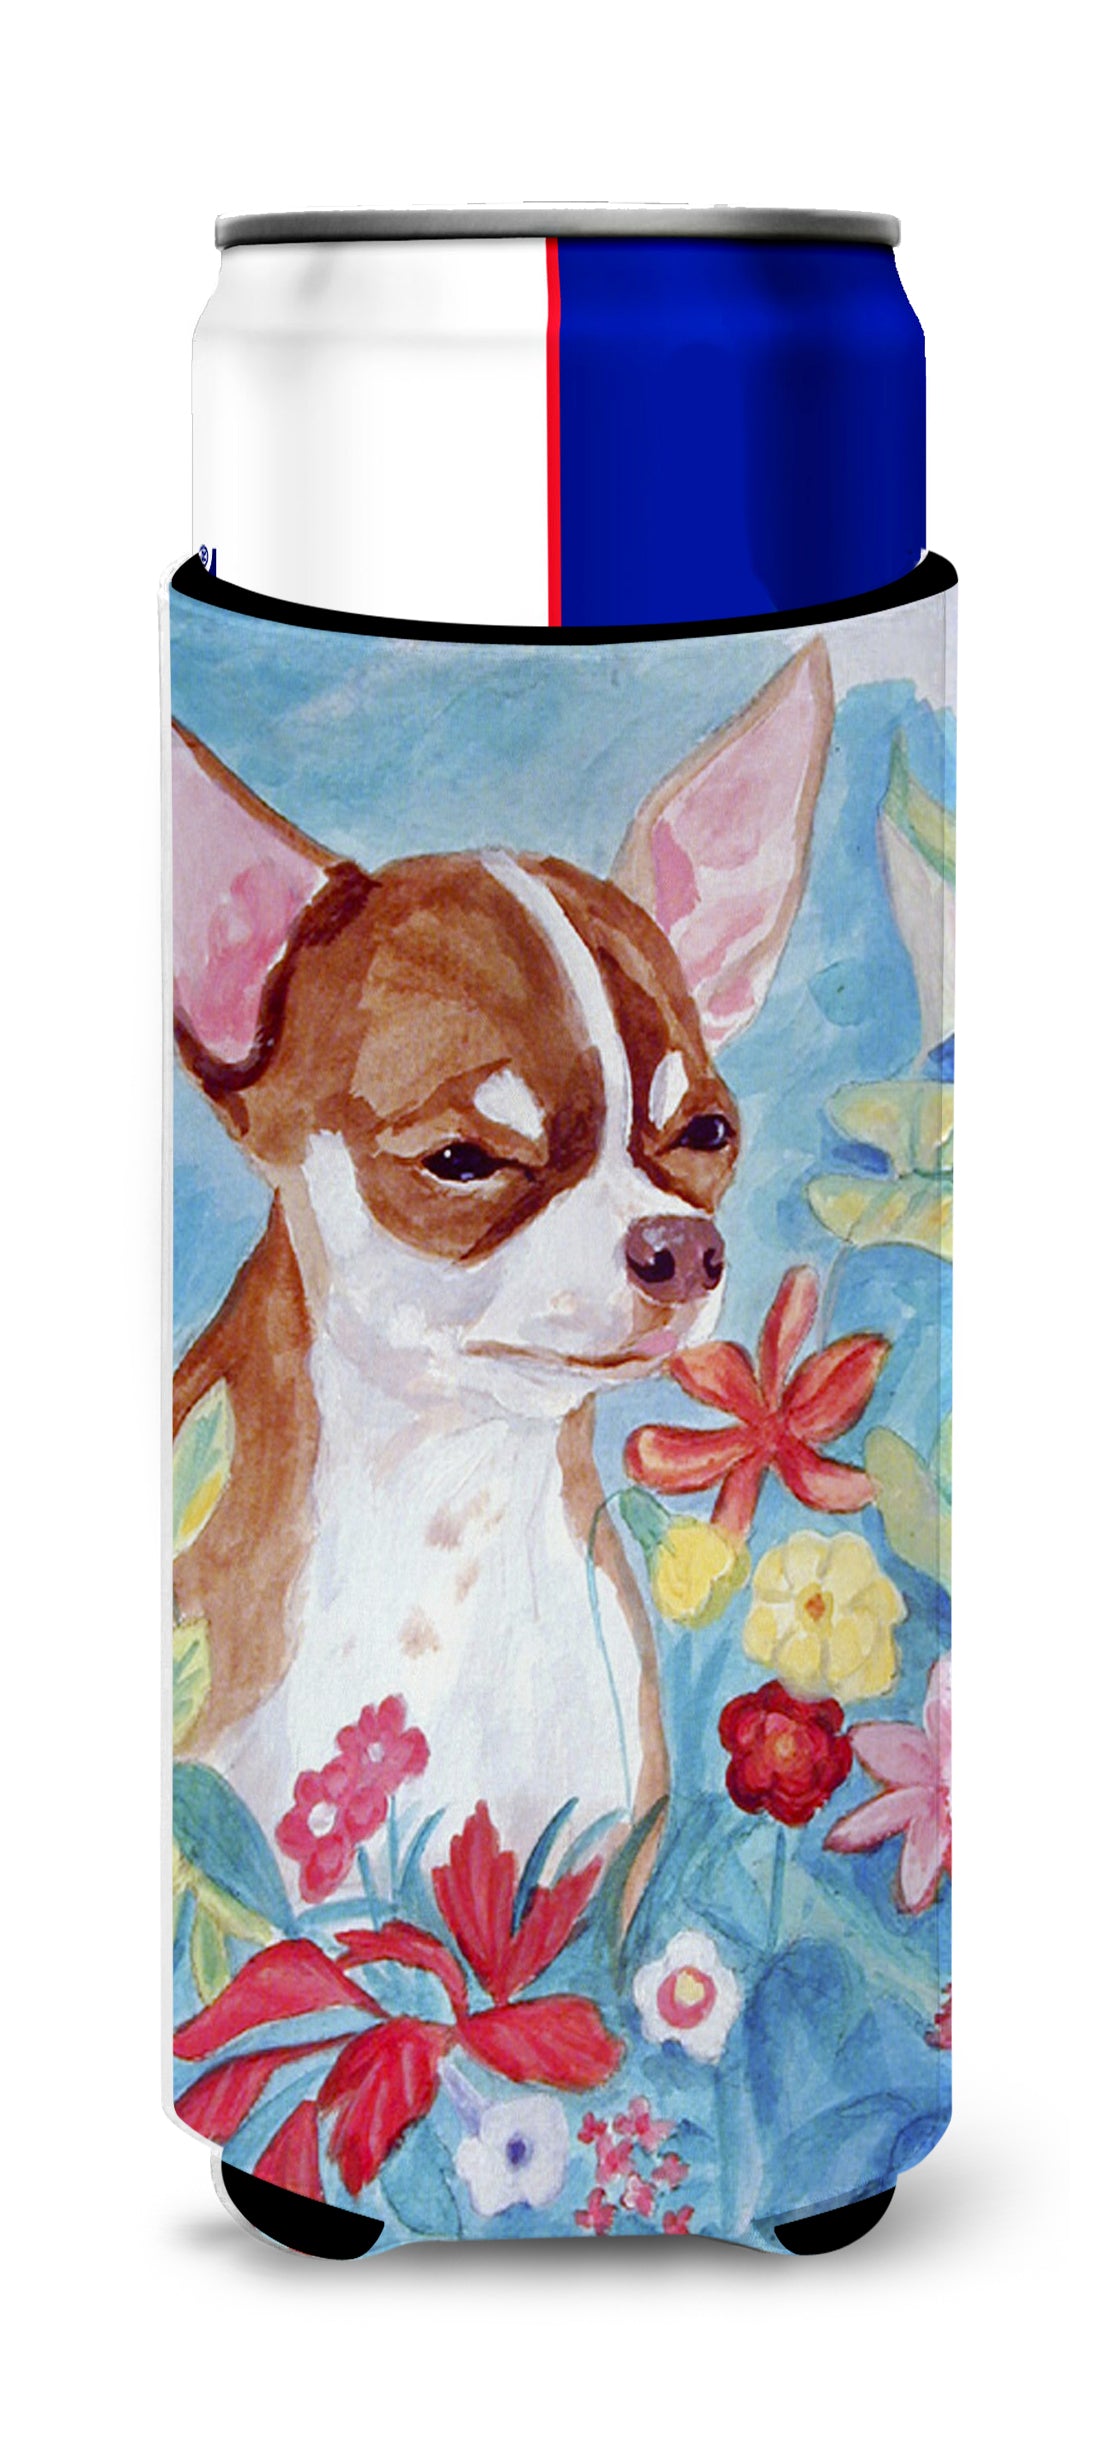 Chihuahua in flowers Ultra Beverage Insulators for slim cans 7053MUK.